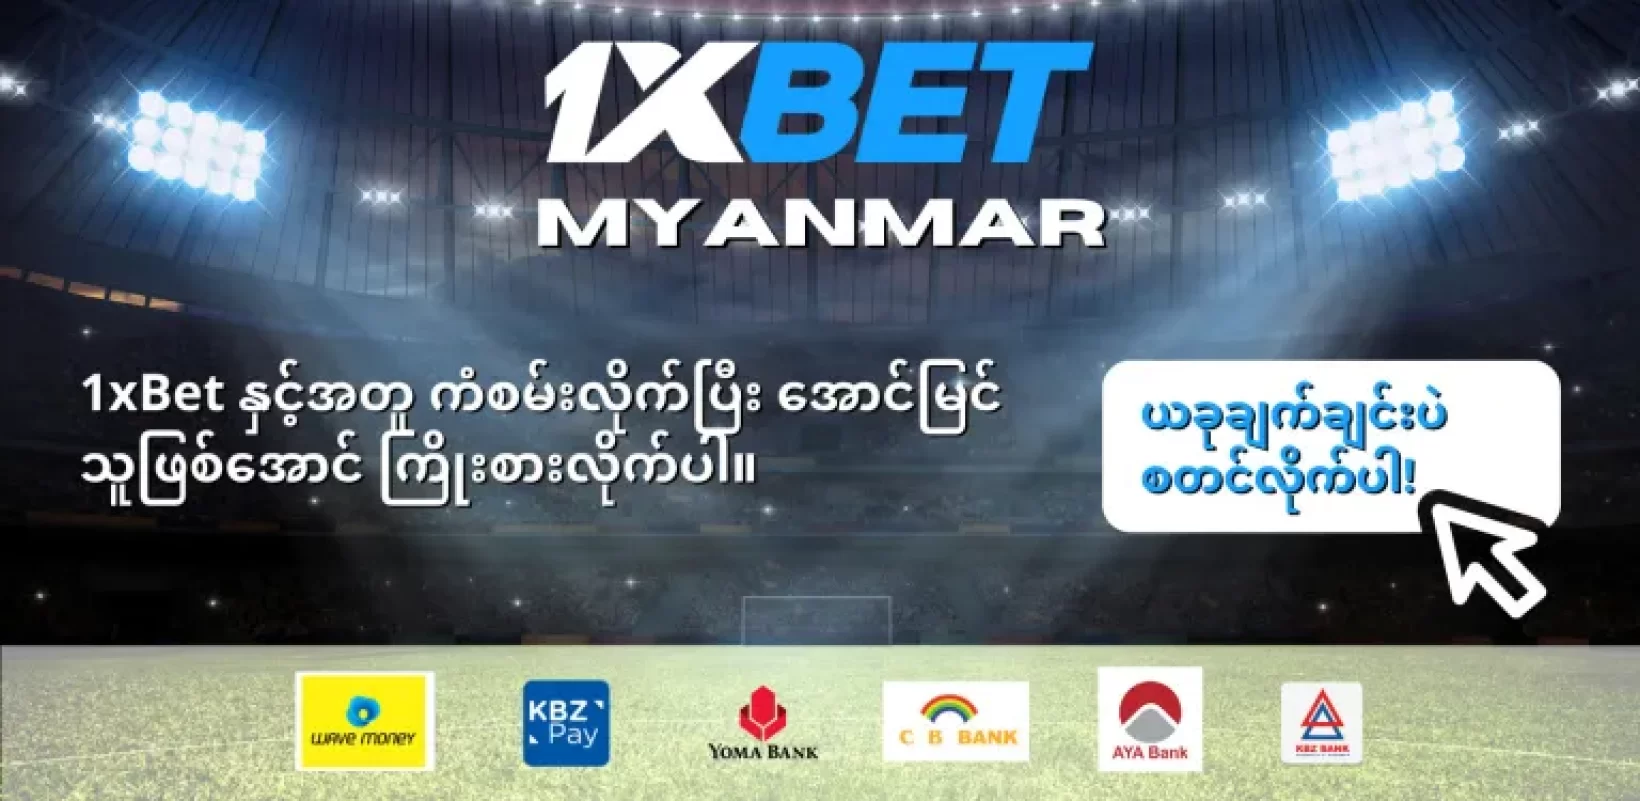 1xBet Myanmar home page